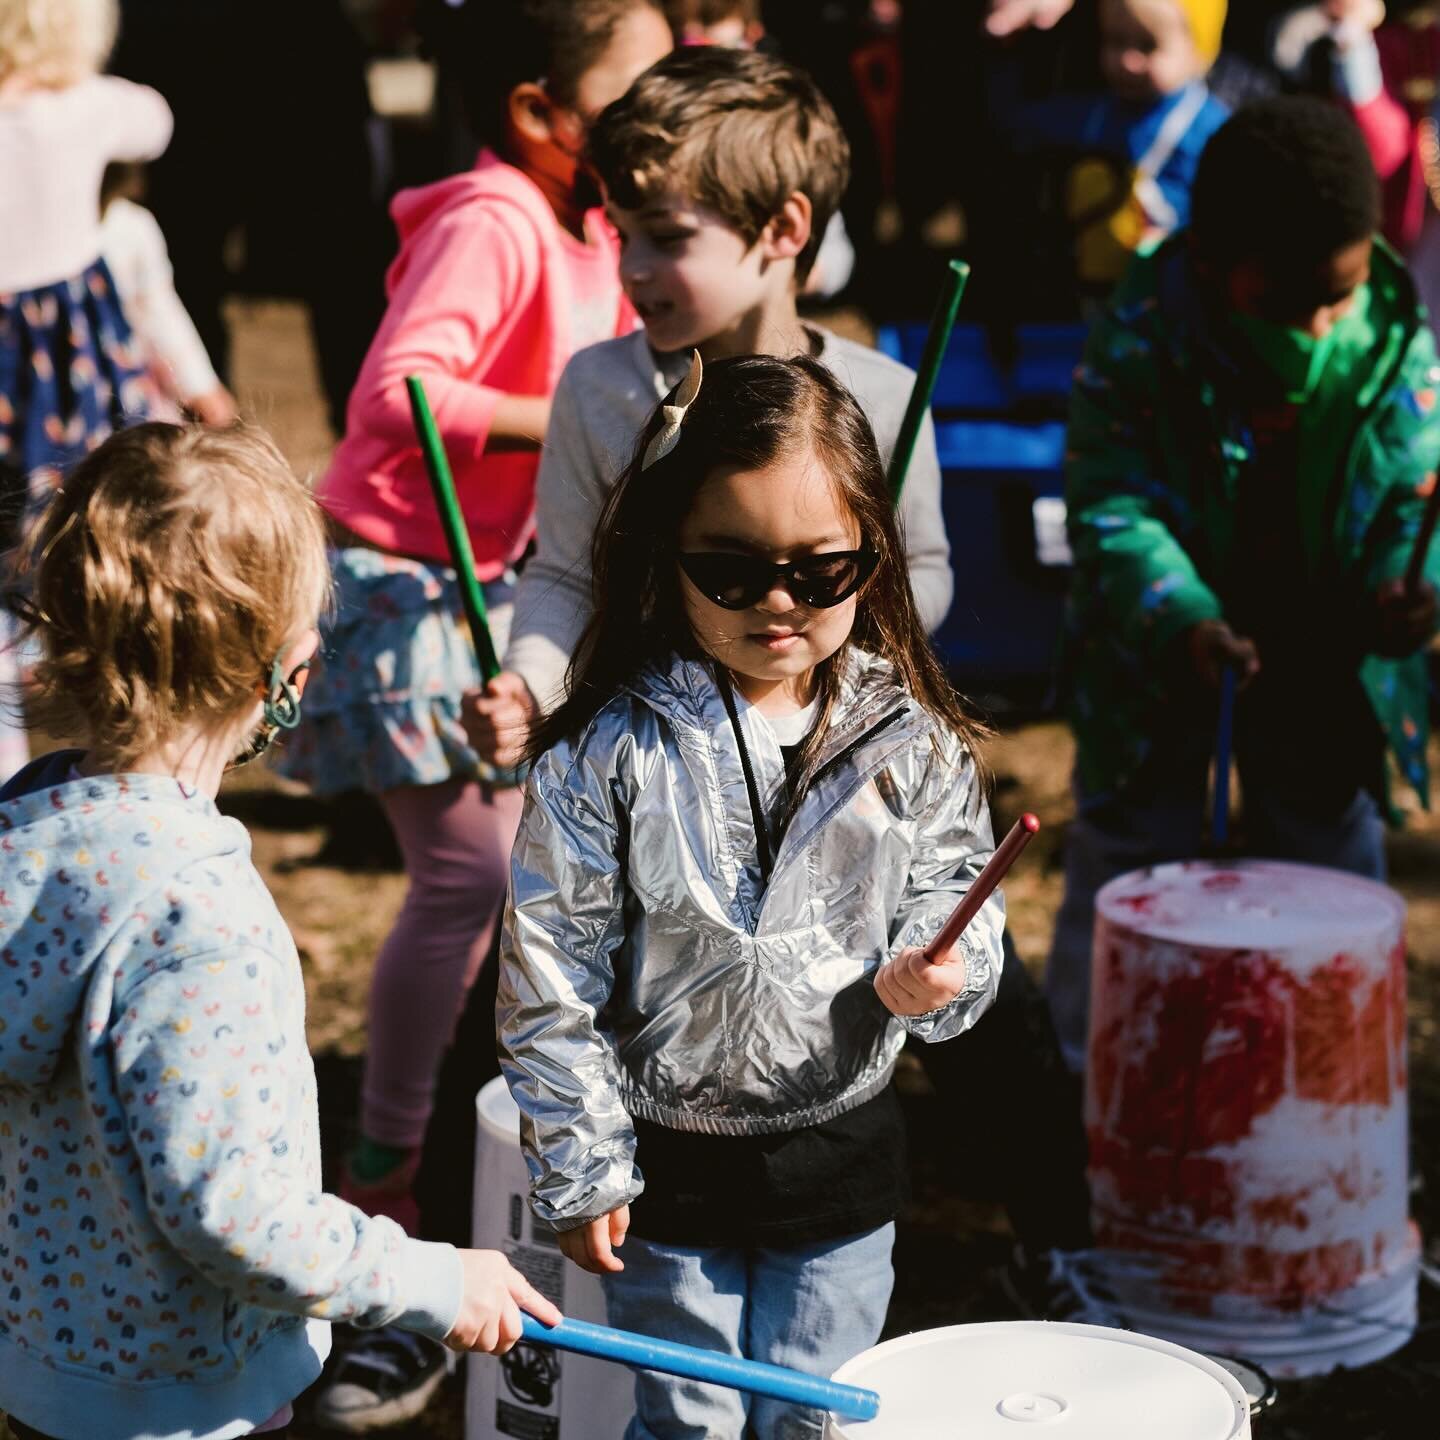 10:30-1pm Sat🪘 BANG BANG for Little Friends DRUM CIRCLE ! Drummer Grove, Prospect Park (Concert Grove if rain is heavy)! We have raised $65,100 thank to you, AWESOME Community! 
Last chance to donate to help us get to our goal of $75K! Link in bio! 